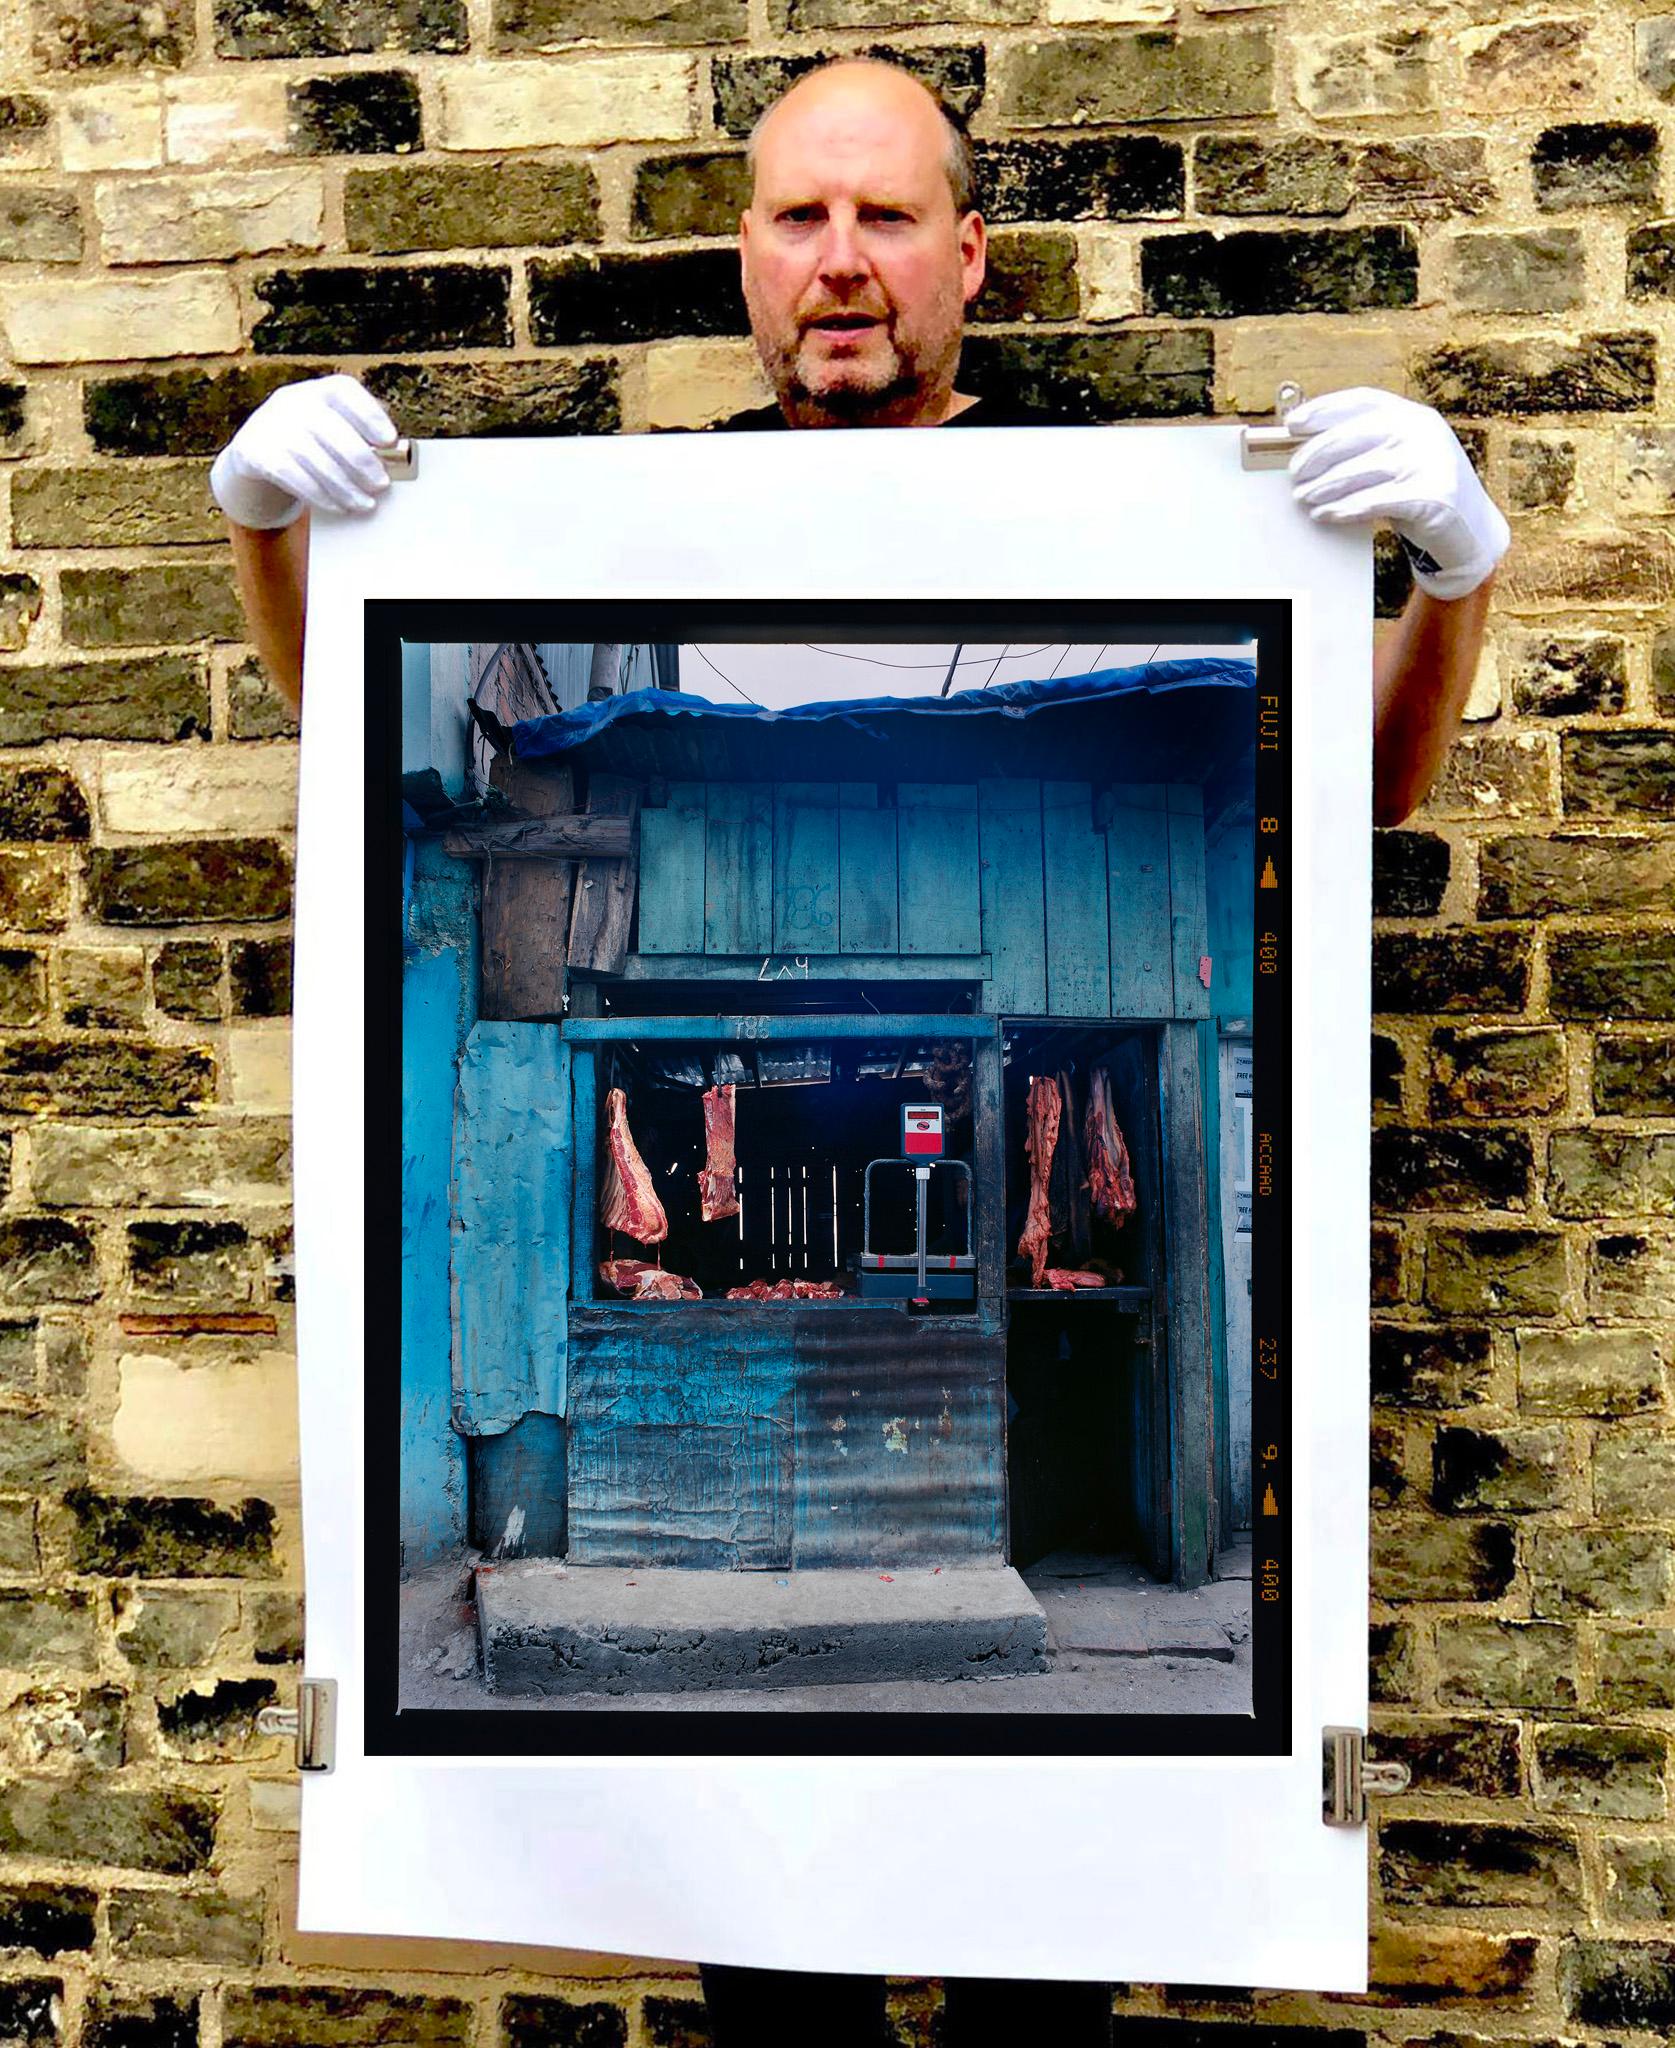 Darjeeling Butchers, street photography on Richard Heeps' journey in India, a pilgrimage from Kerala in the South, to his Grandfather's birthplace Meerut in the North. One of a number of 'butchers' Richard has photographed, perfectly capturing the